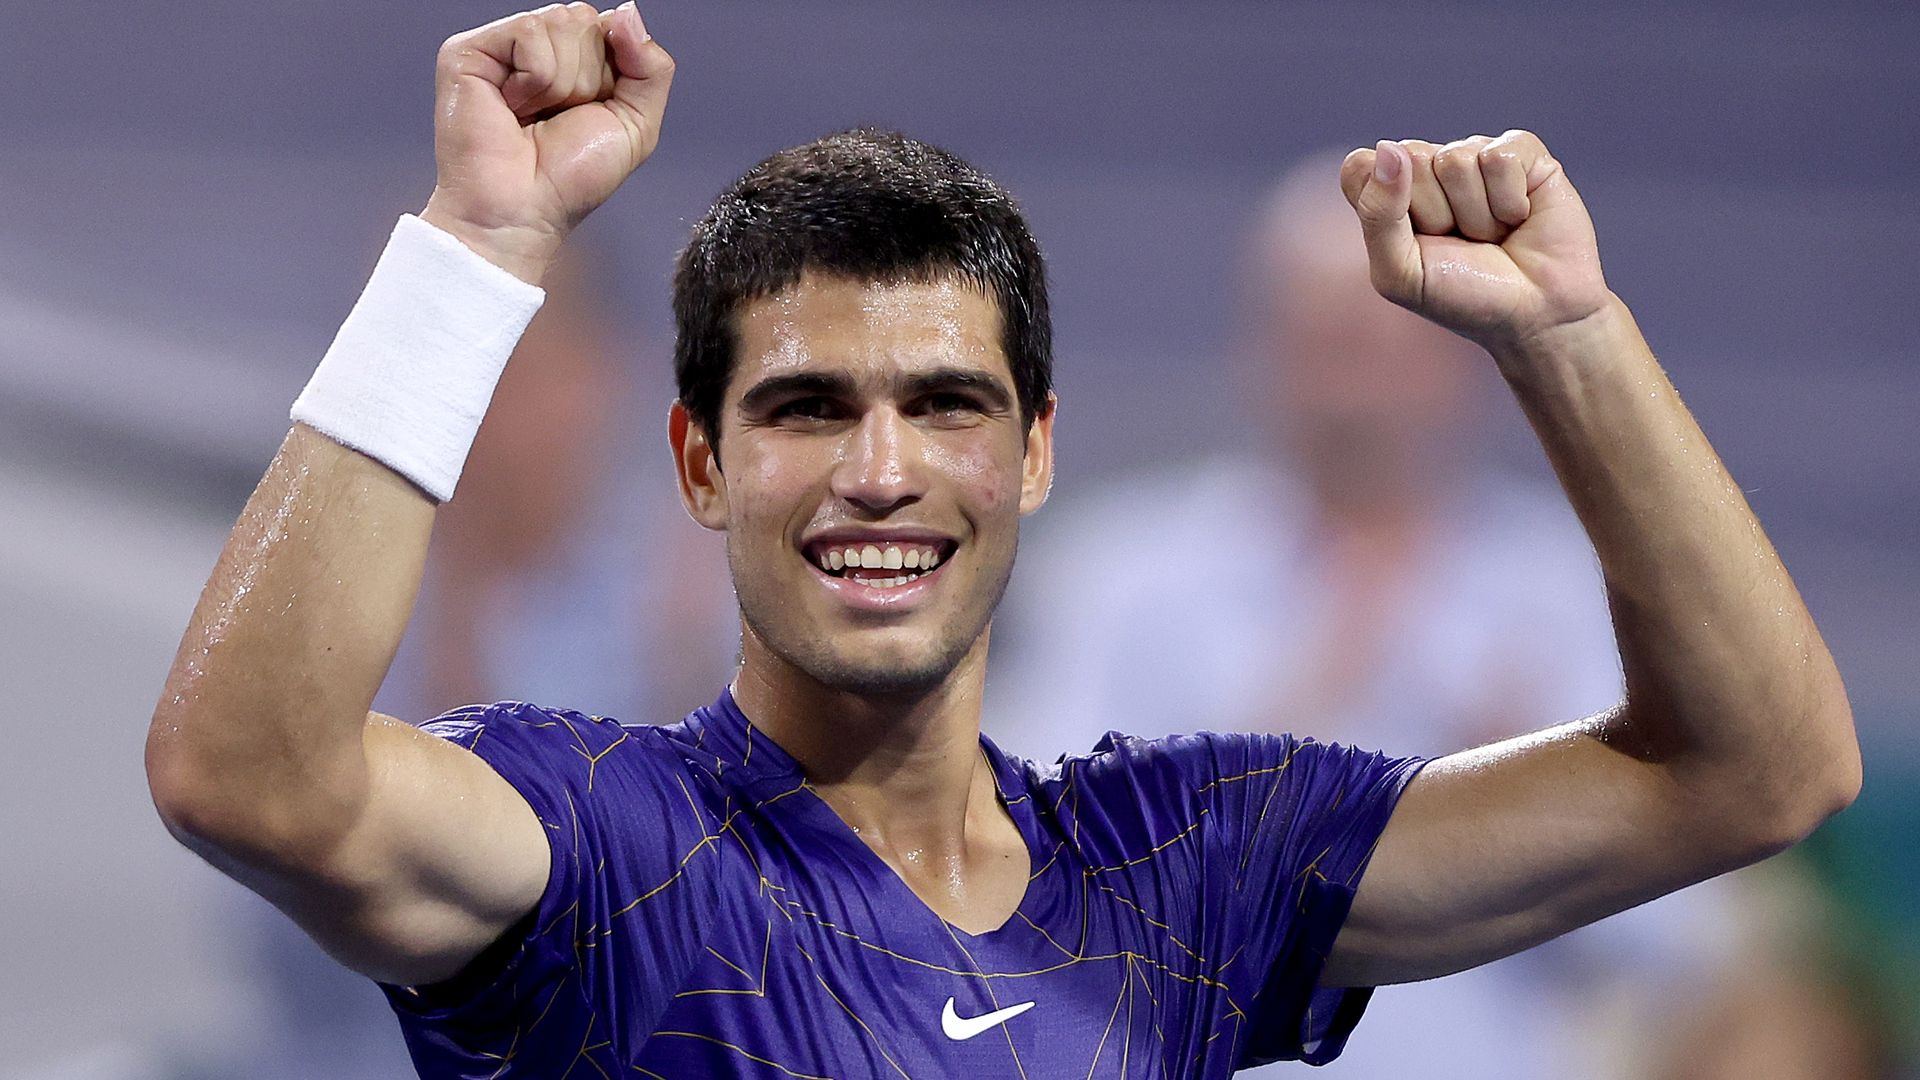 Carlos Alcaraz of Spain celebrates his win against Hubert Hurkacz of Poland during the semifinals of the Miami Open at Hard Rock Stadium on April 1, 2022 in Miami Gardens, Florida